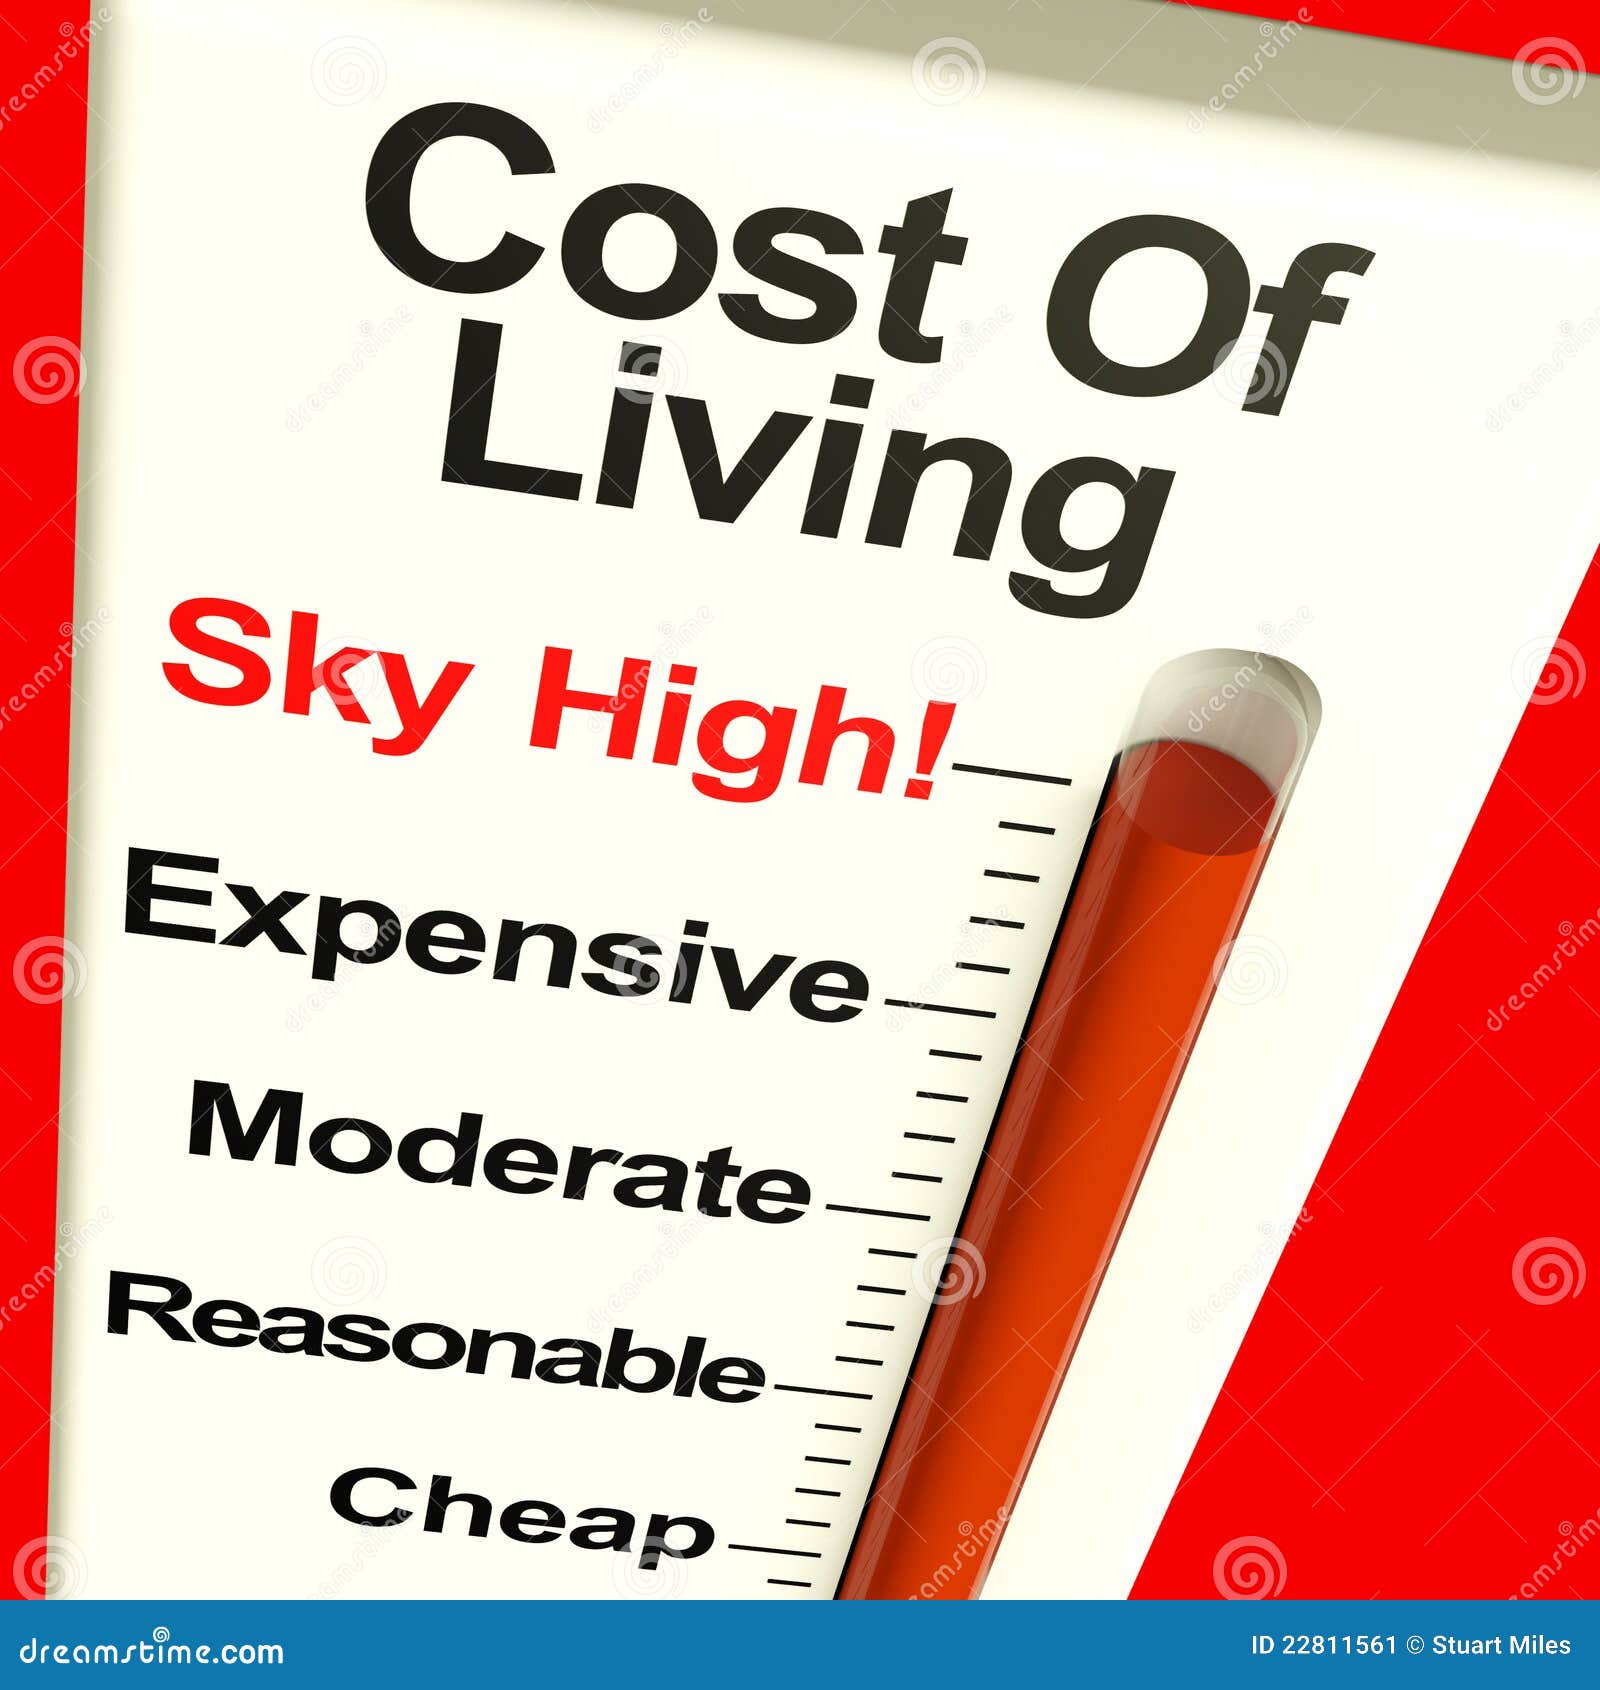 High cost living